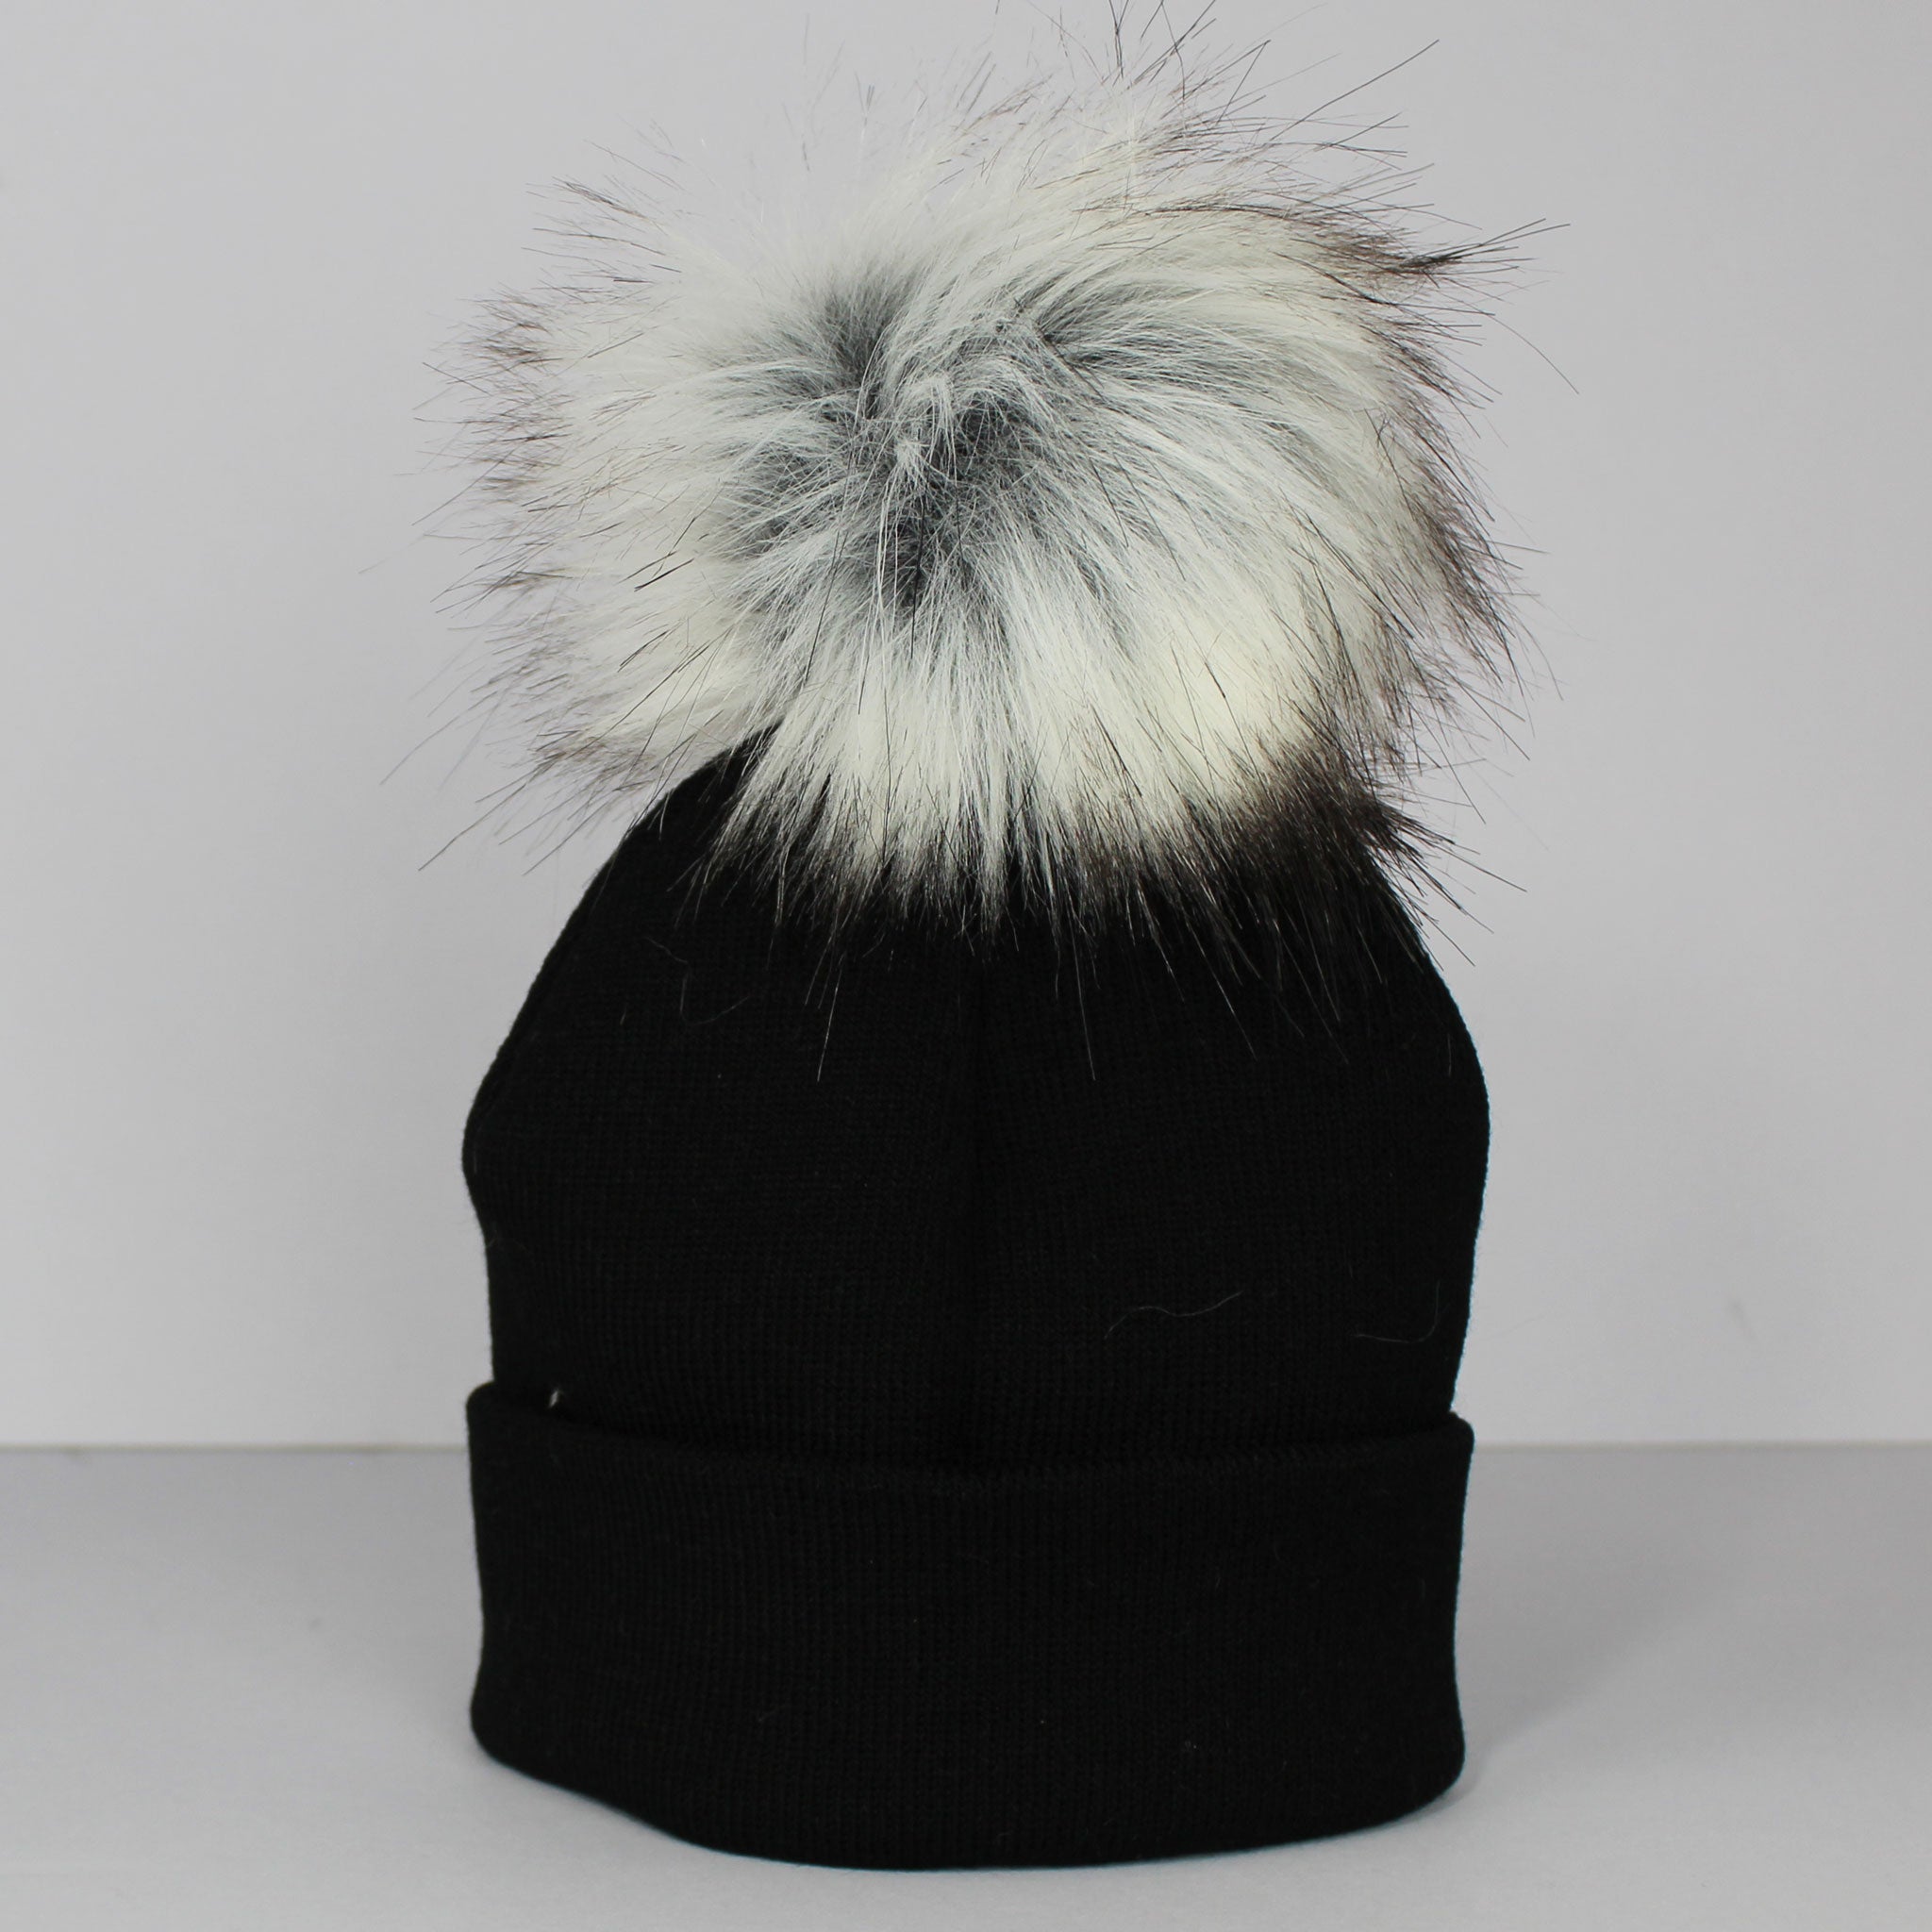 Black Pom Toddlers Hat - 2 to 6 years